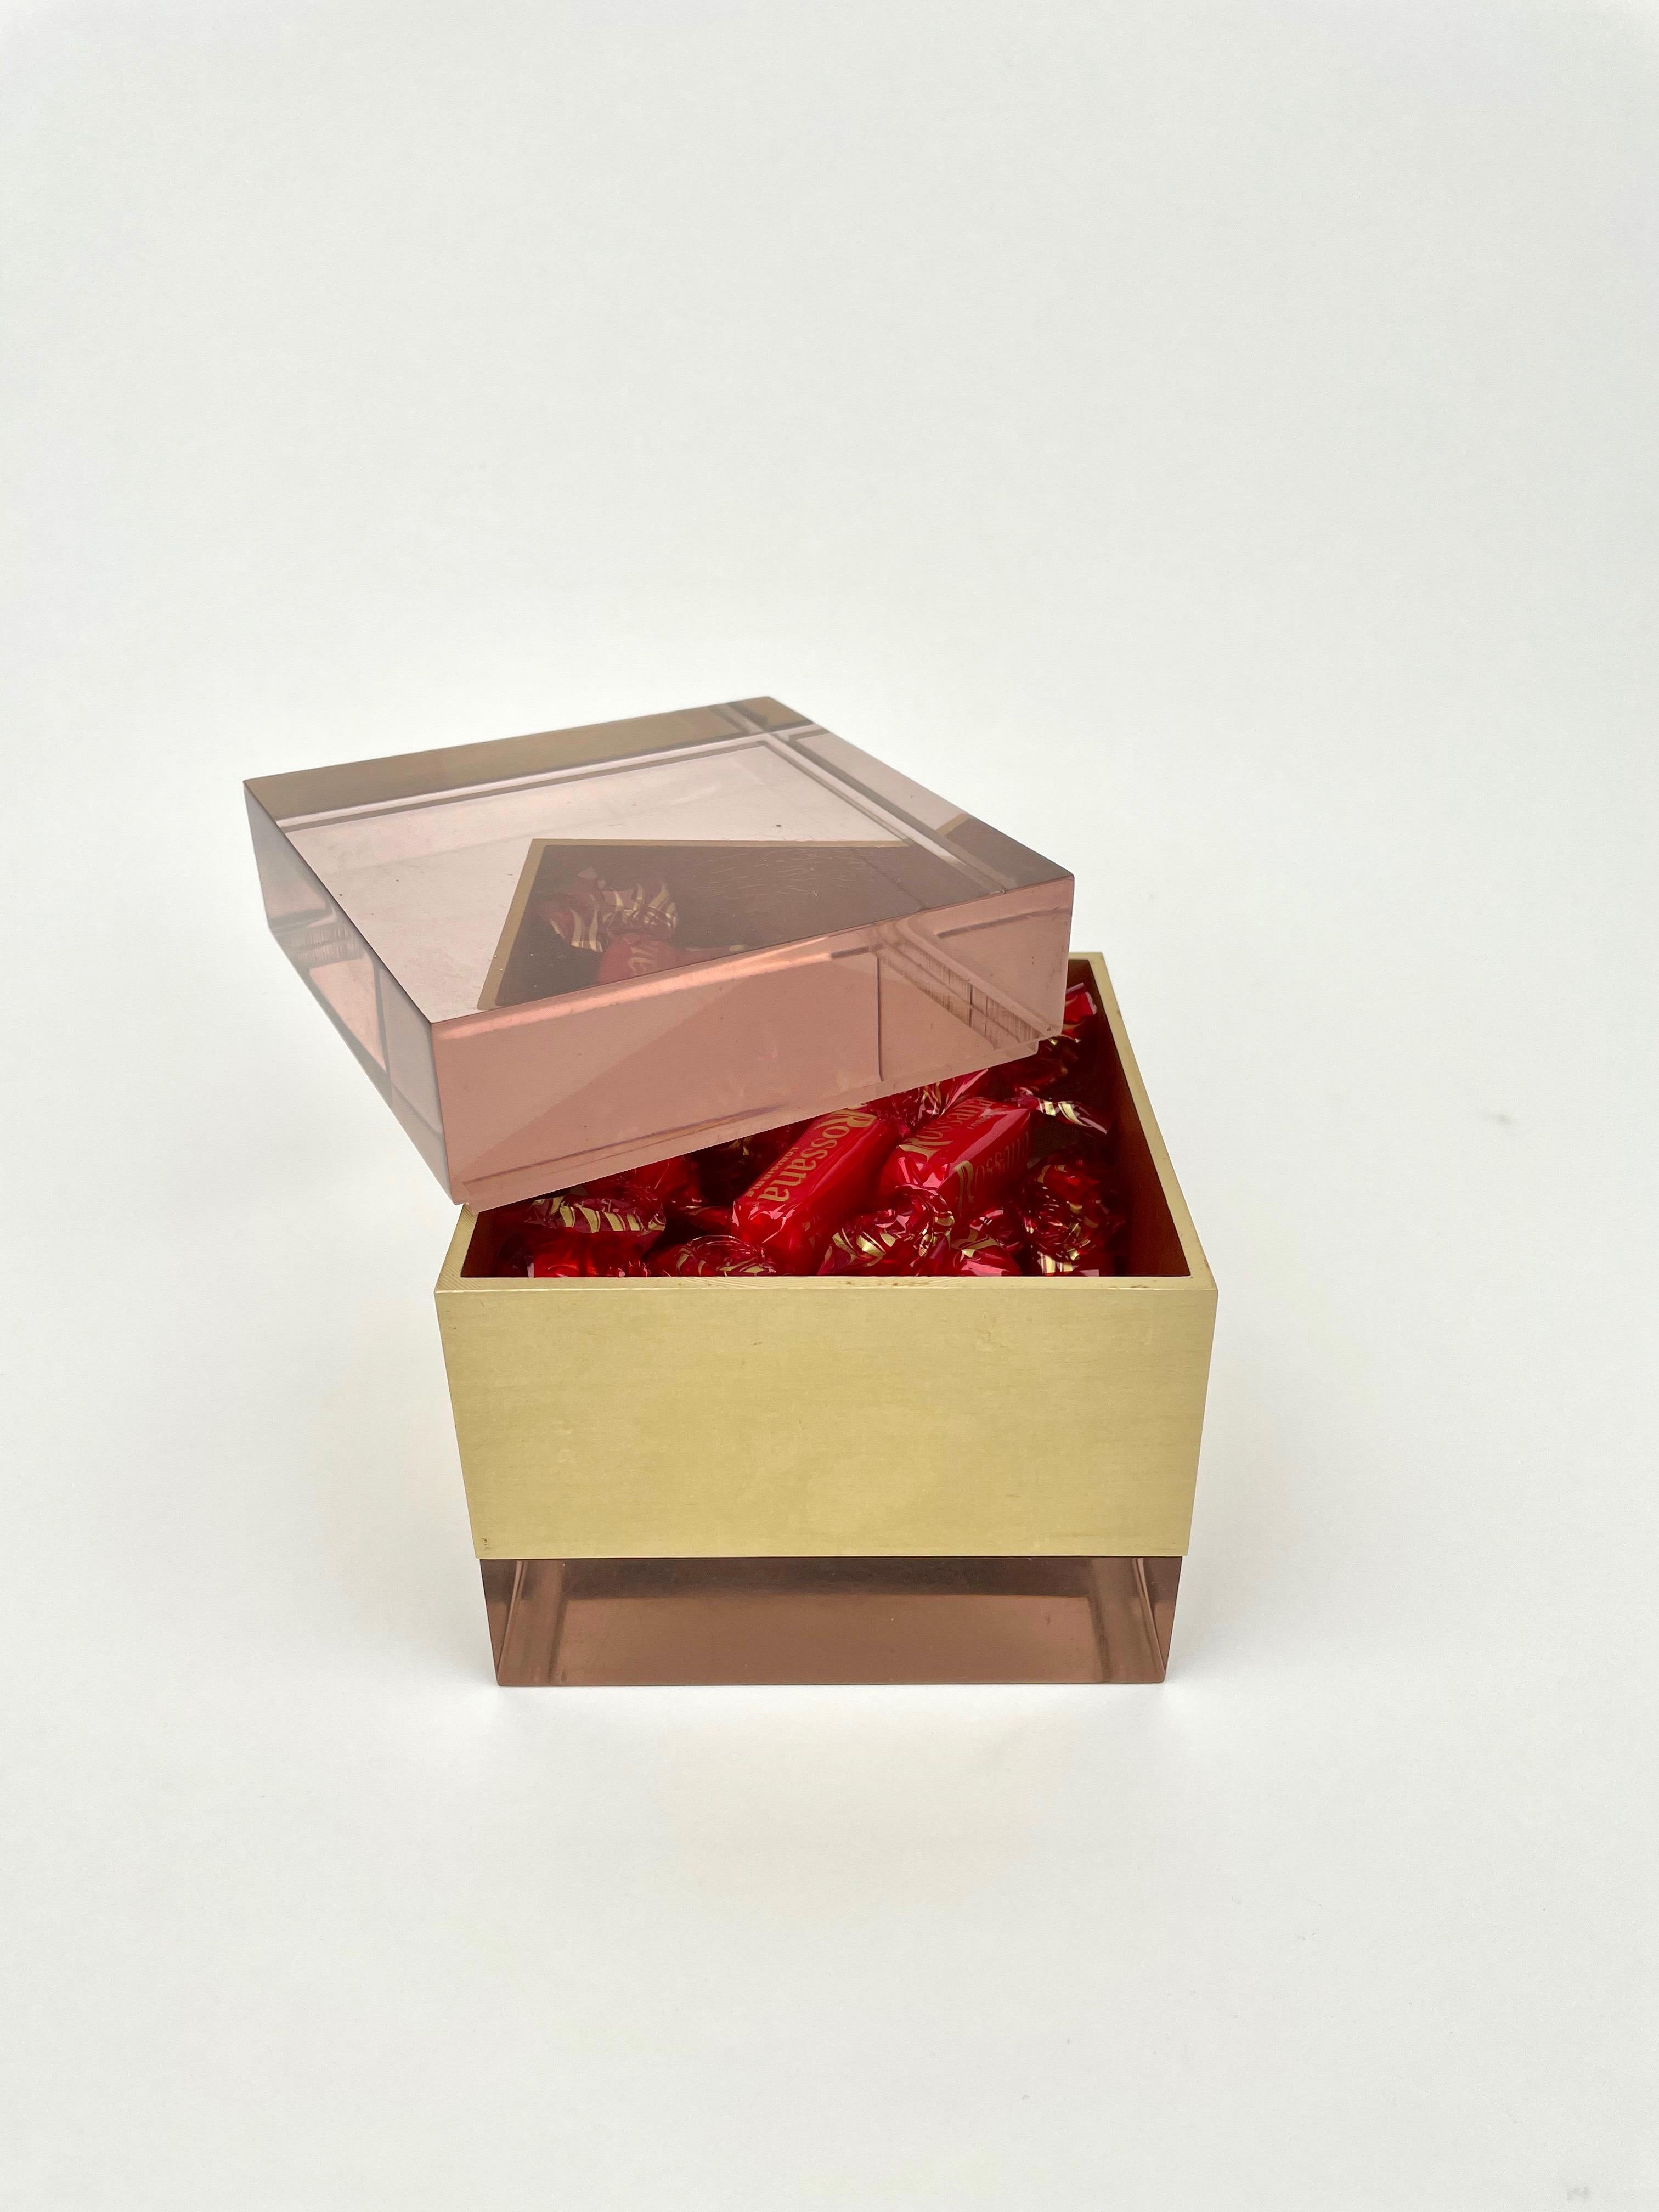 Alessandro Albrizzi Cube Box in Purple Lucite and Gold Metal, Italy, 1970s For Sale 4